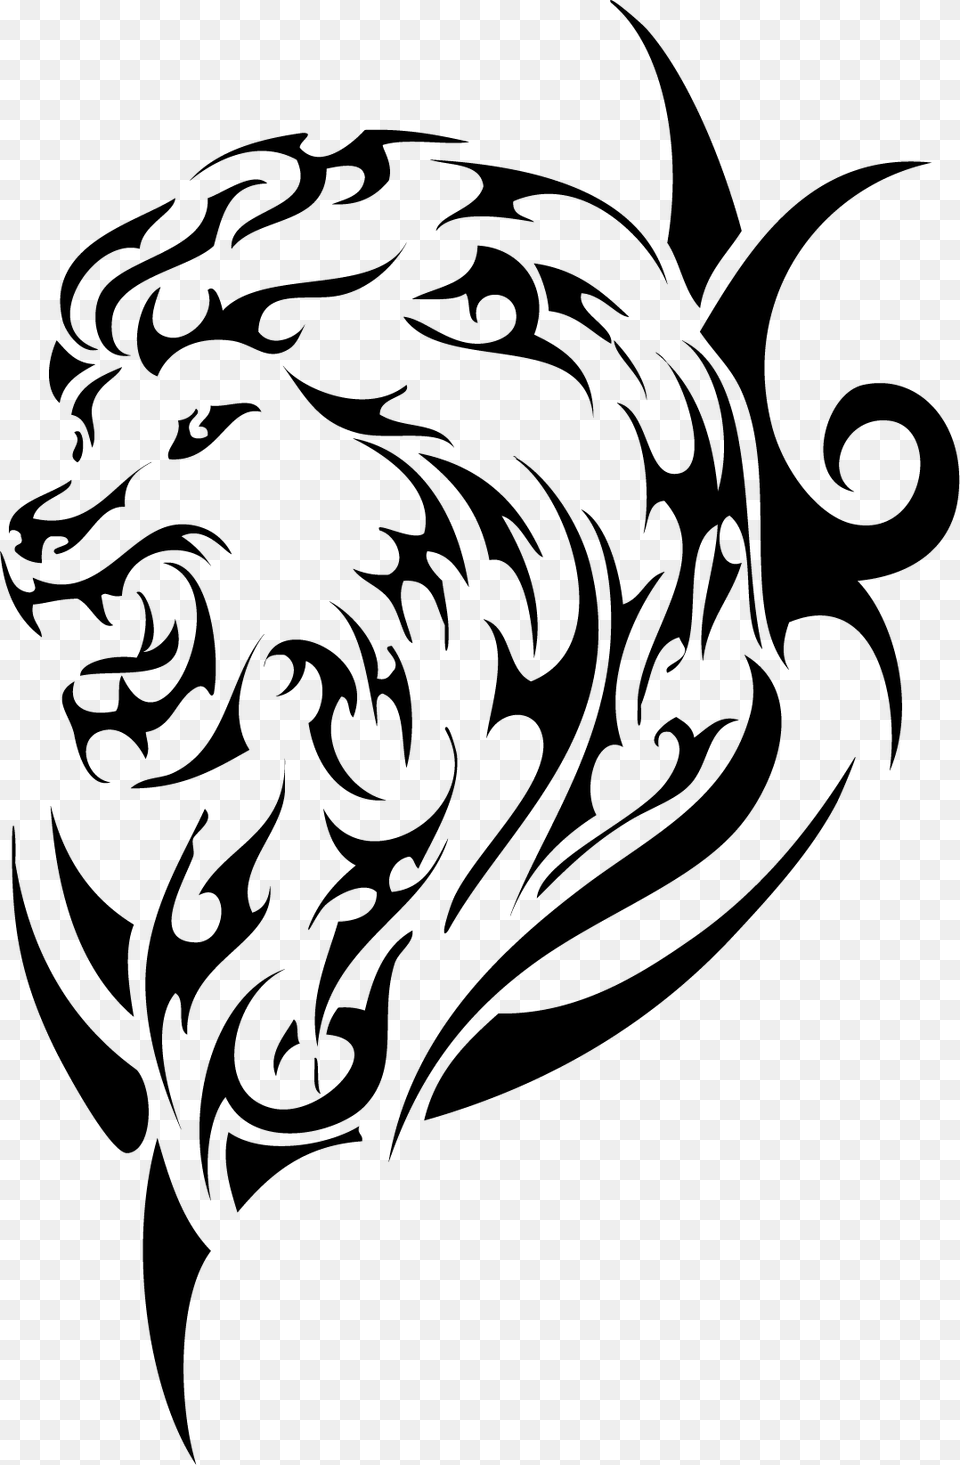 Tiger Tattoos Transparent Background, Gray Png